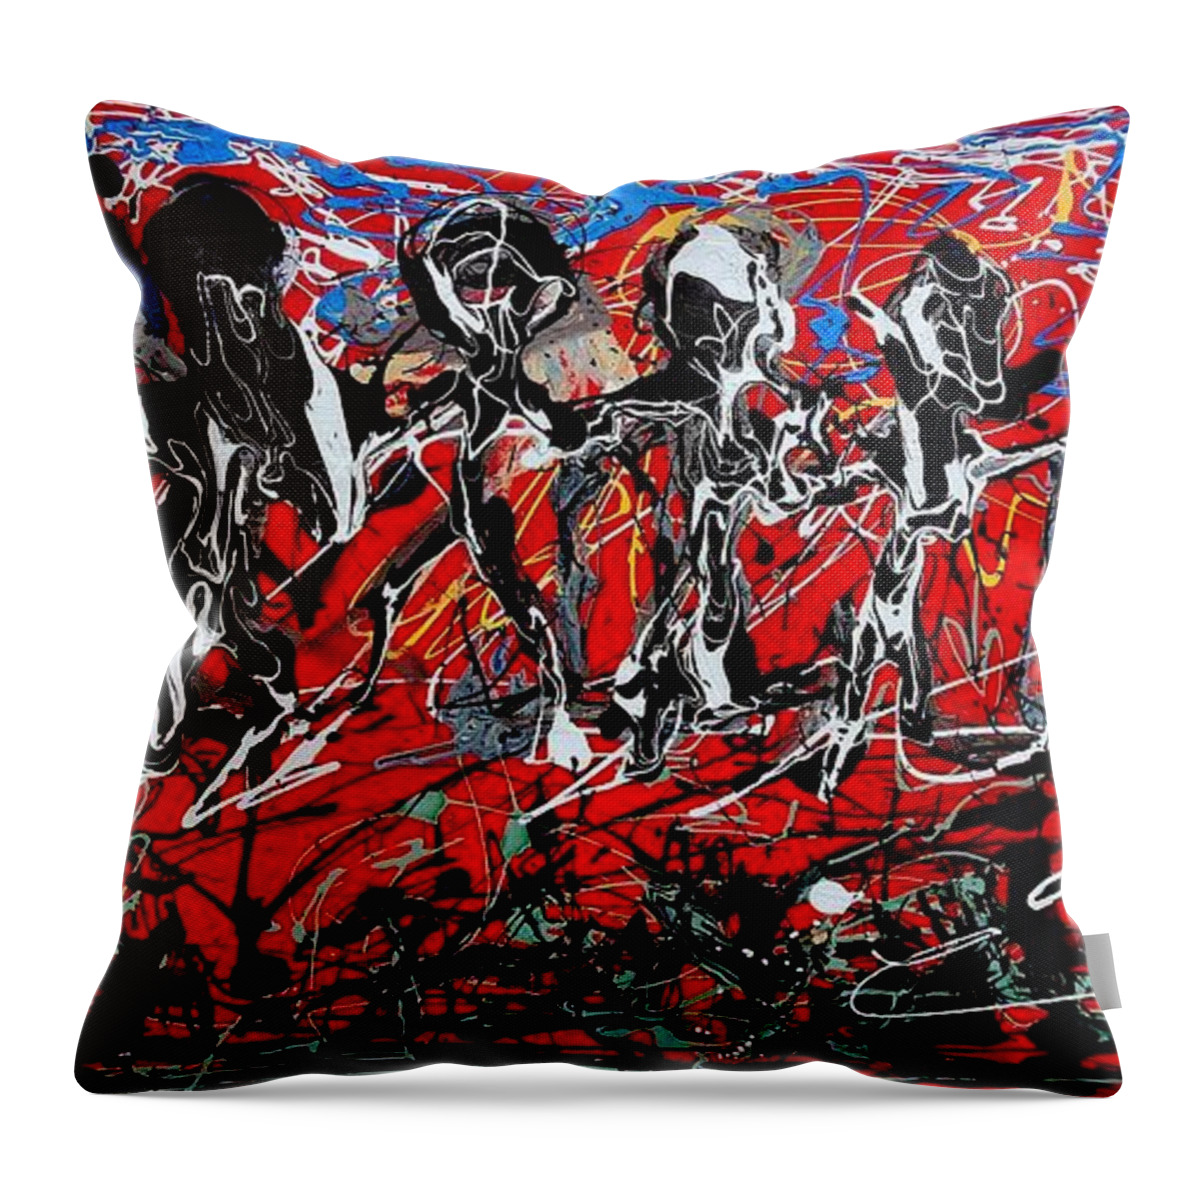  Throw Pillow featuring the painting Vitality by Rebecca Flores